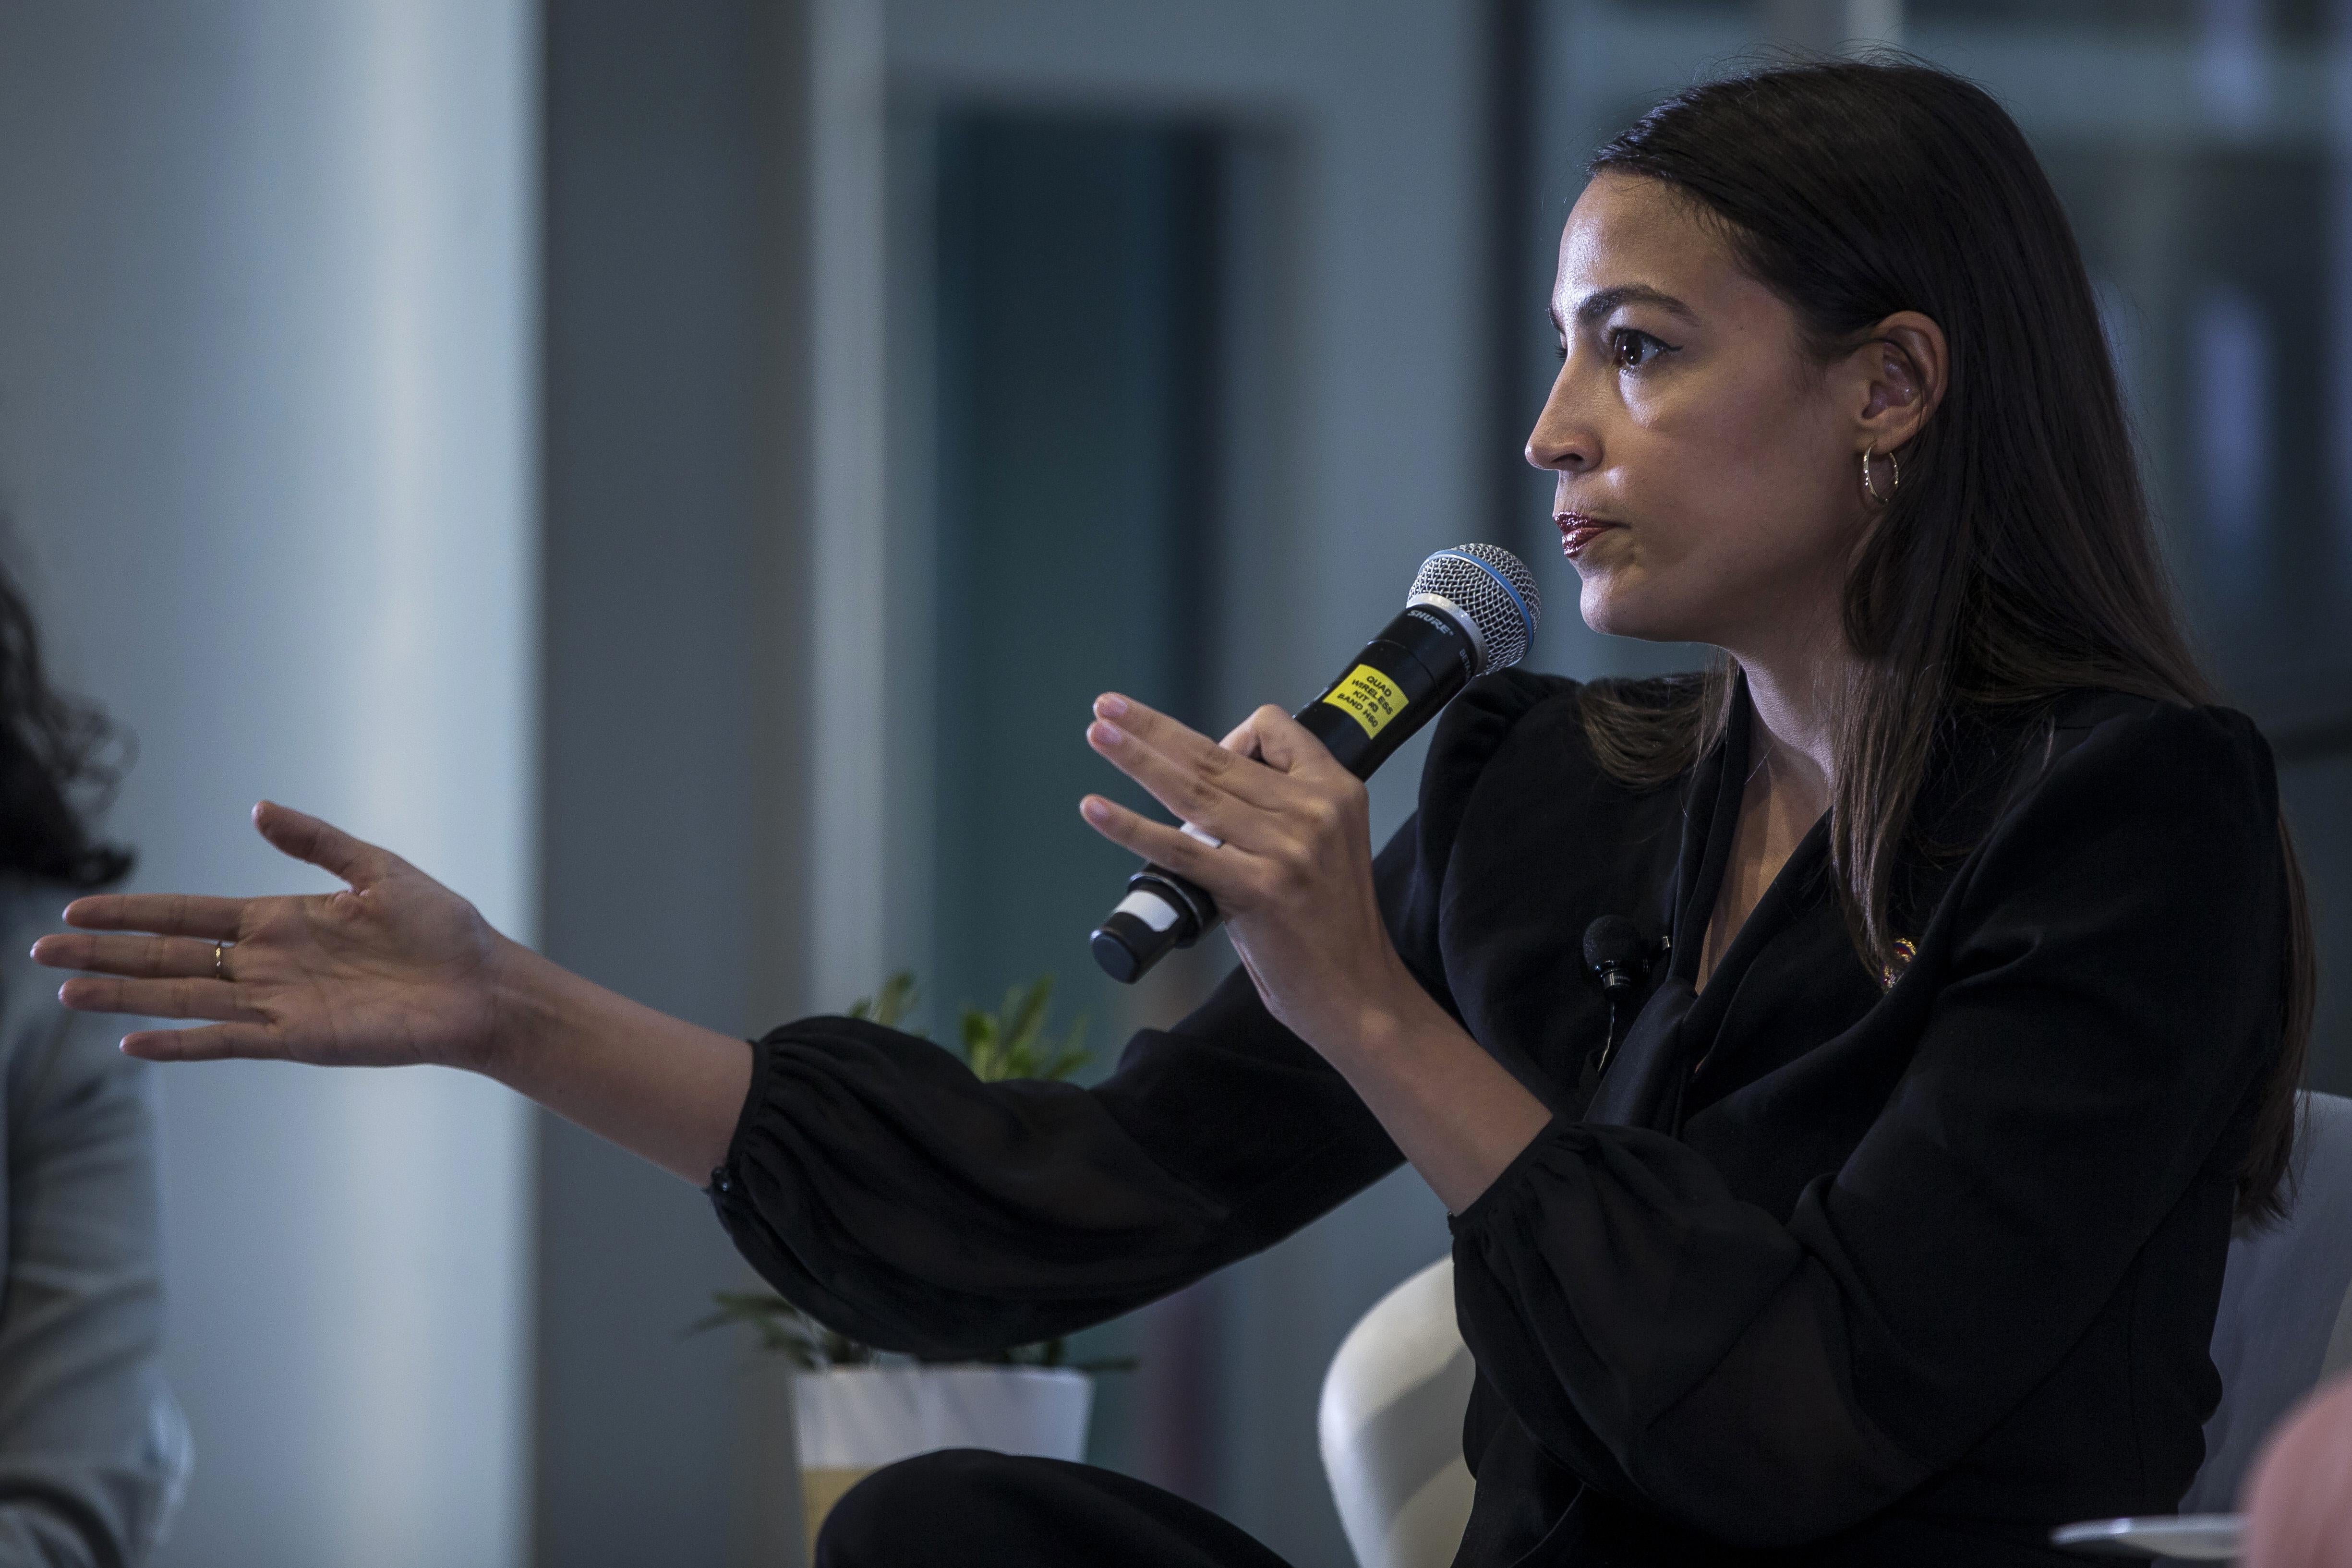 Rep. Alexandria Ocasio-Cortez speaks during a town hall hosted by the NAACP on September 11, 2019 in Washington, D.C.